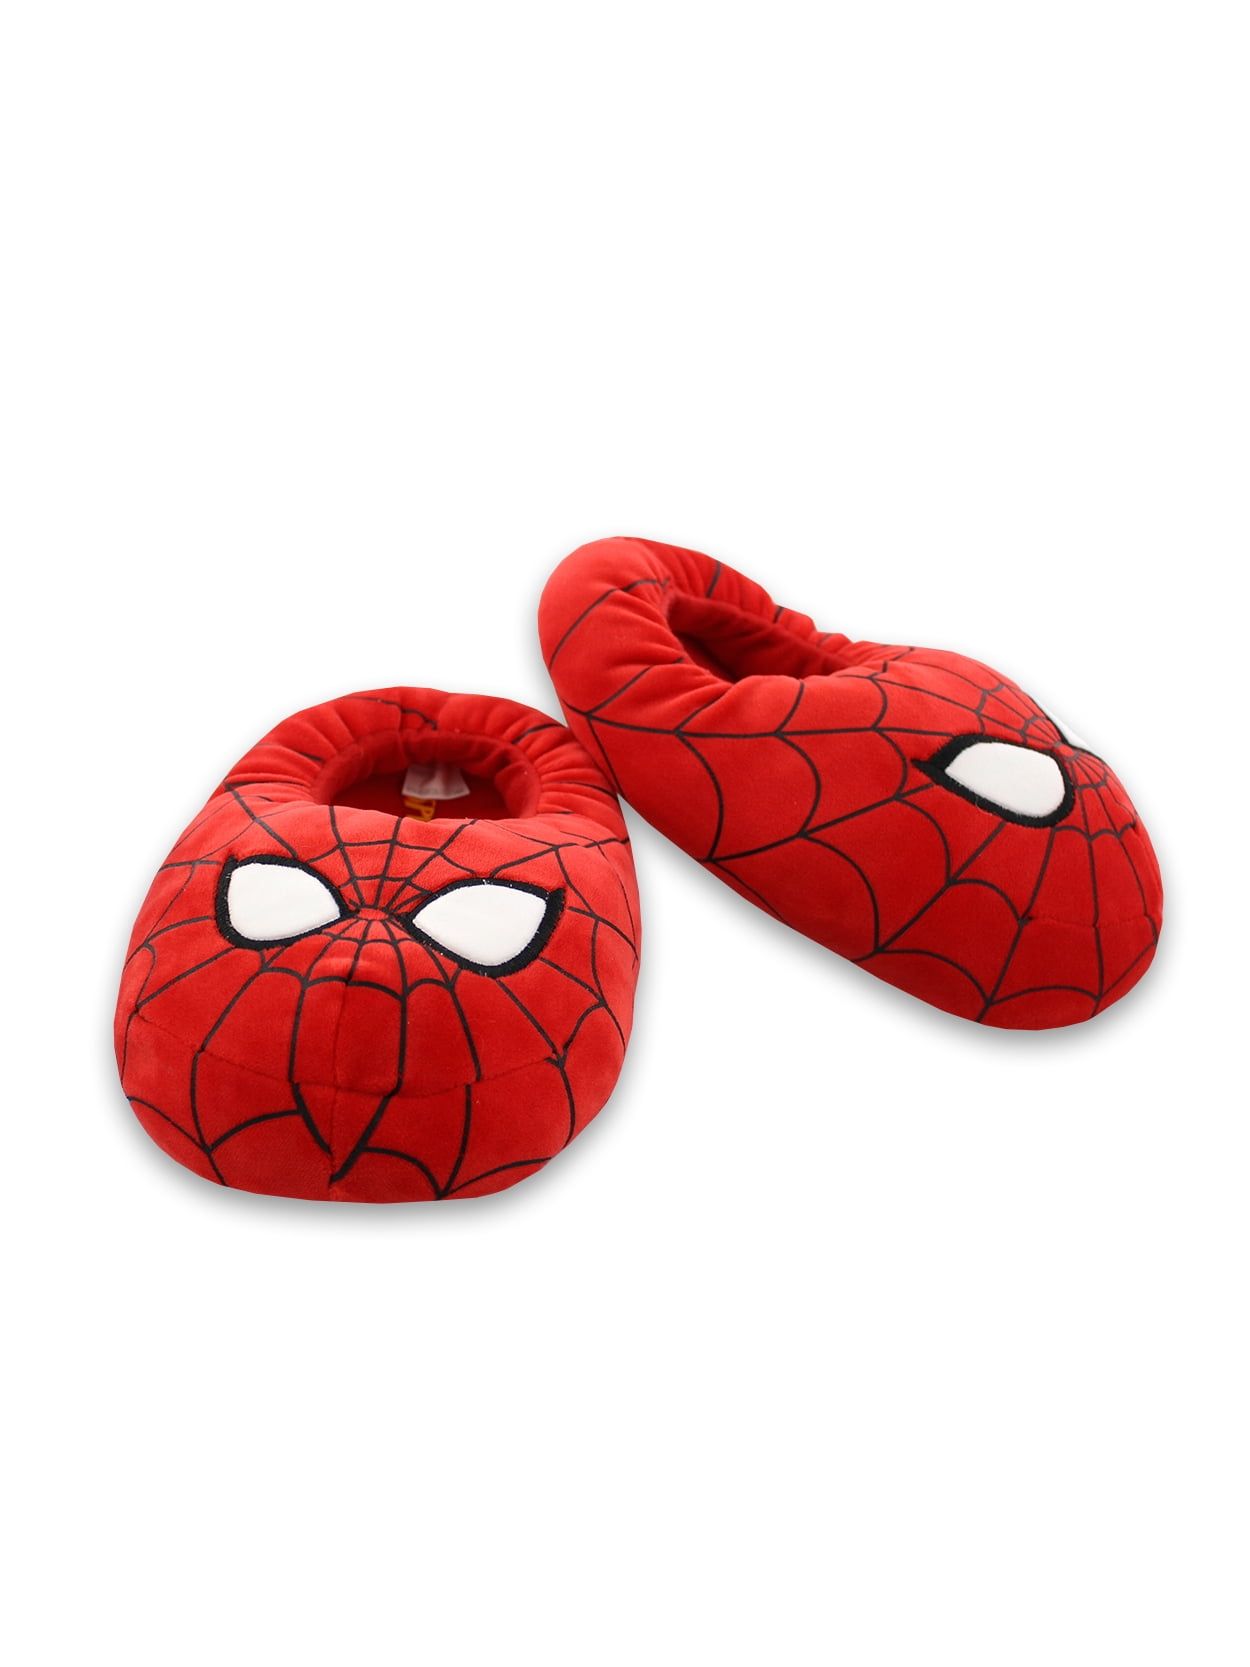 Red size 12 or Blue size 1 Boys Slipper with Marvel Heroes detail